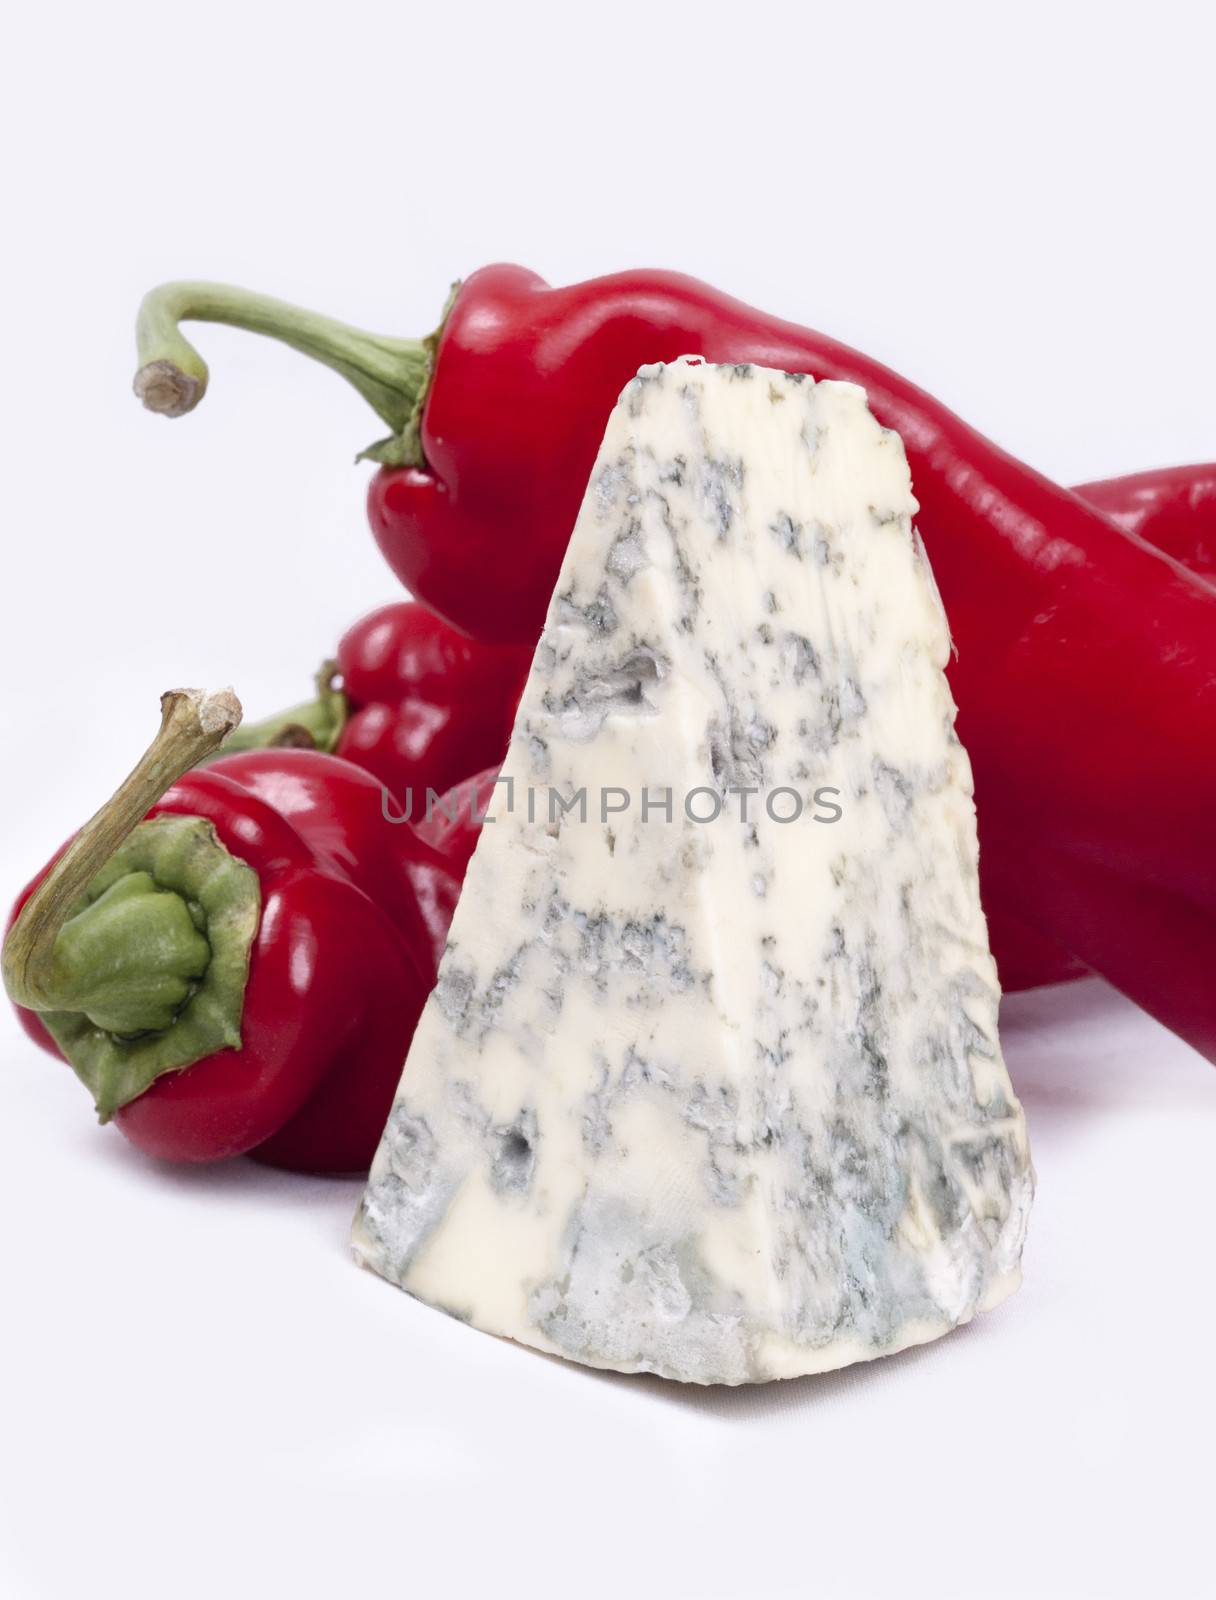 Mold cheese and red pepper on the white bacground.